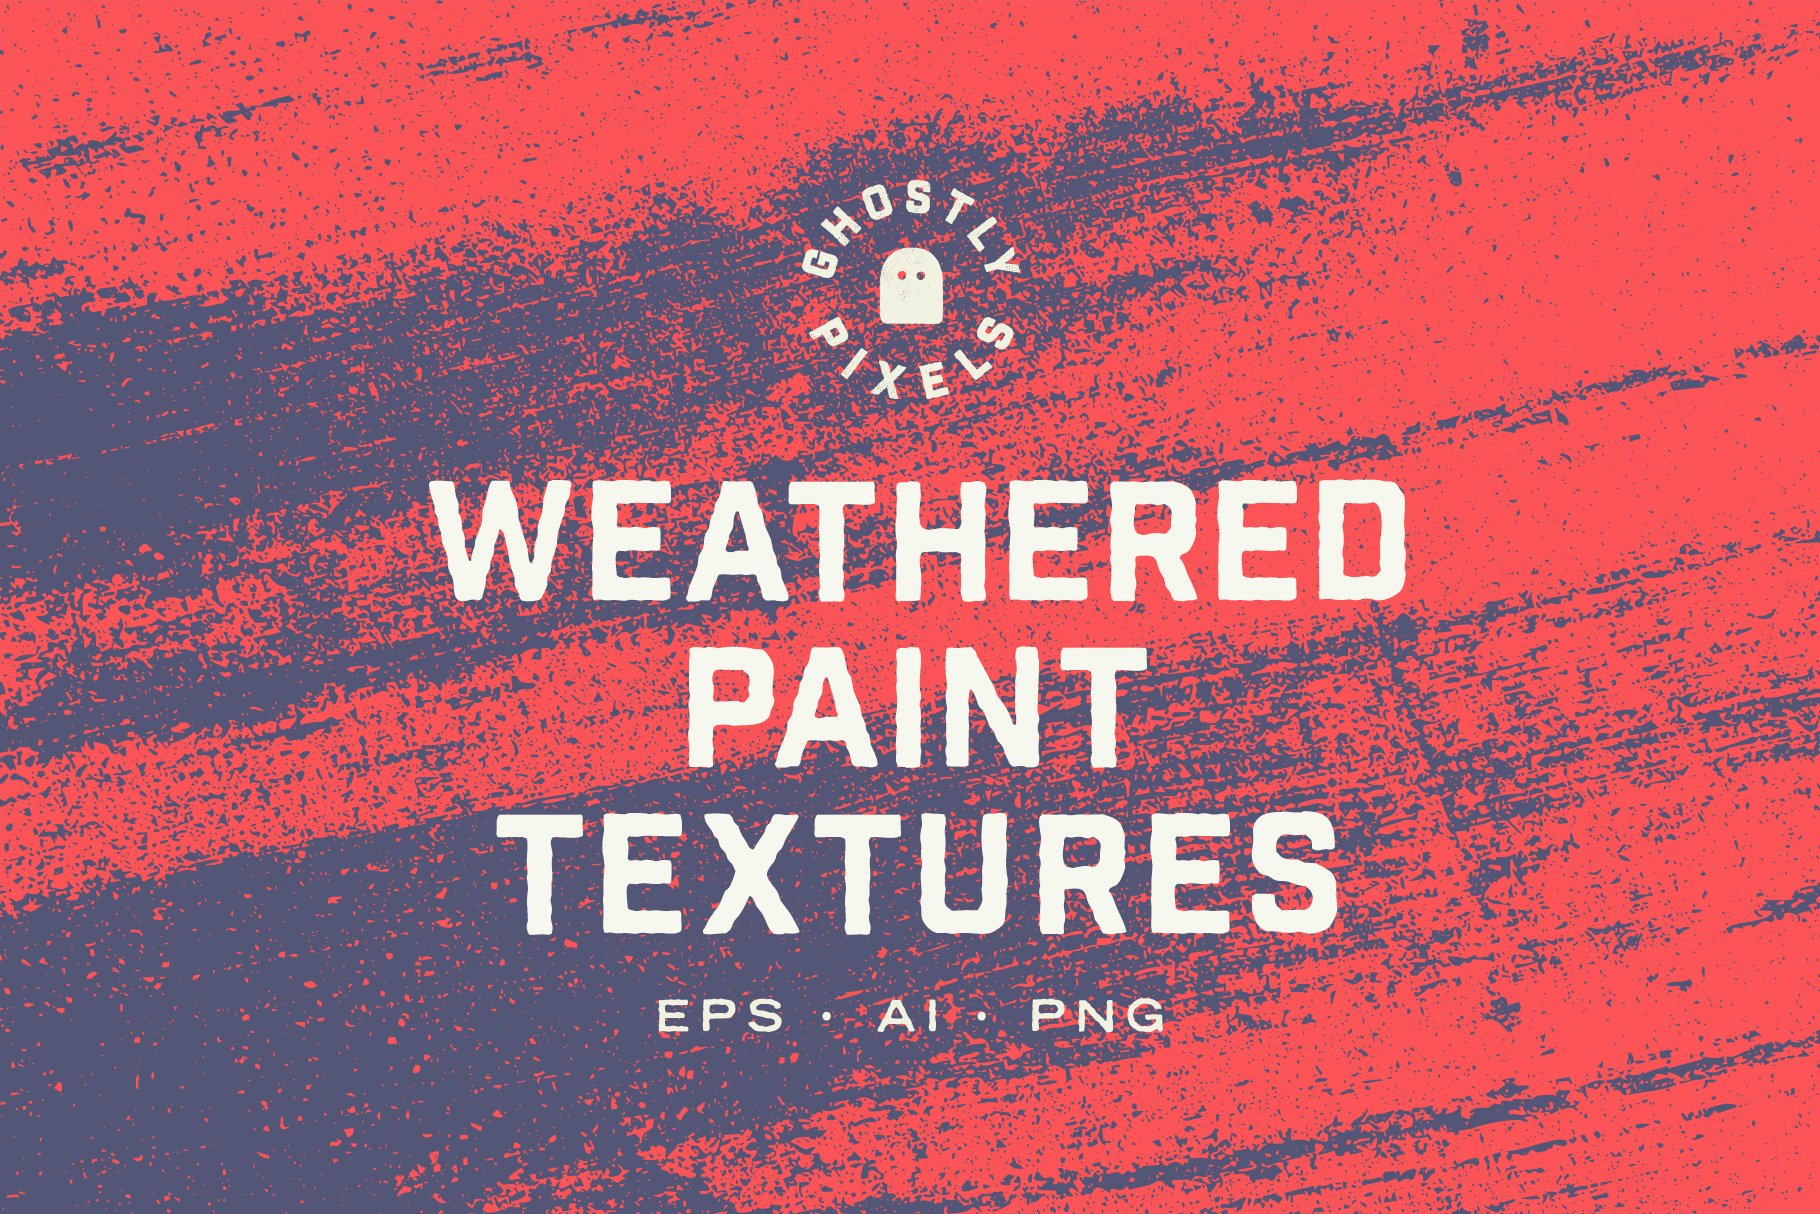 Weathered Paint Textures cover image.